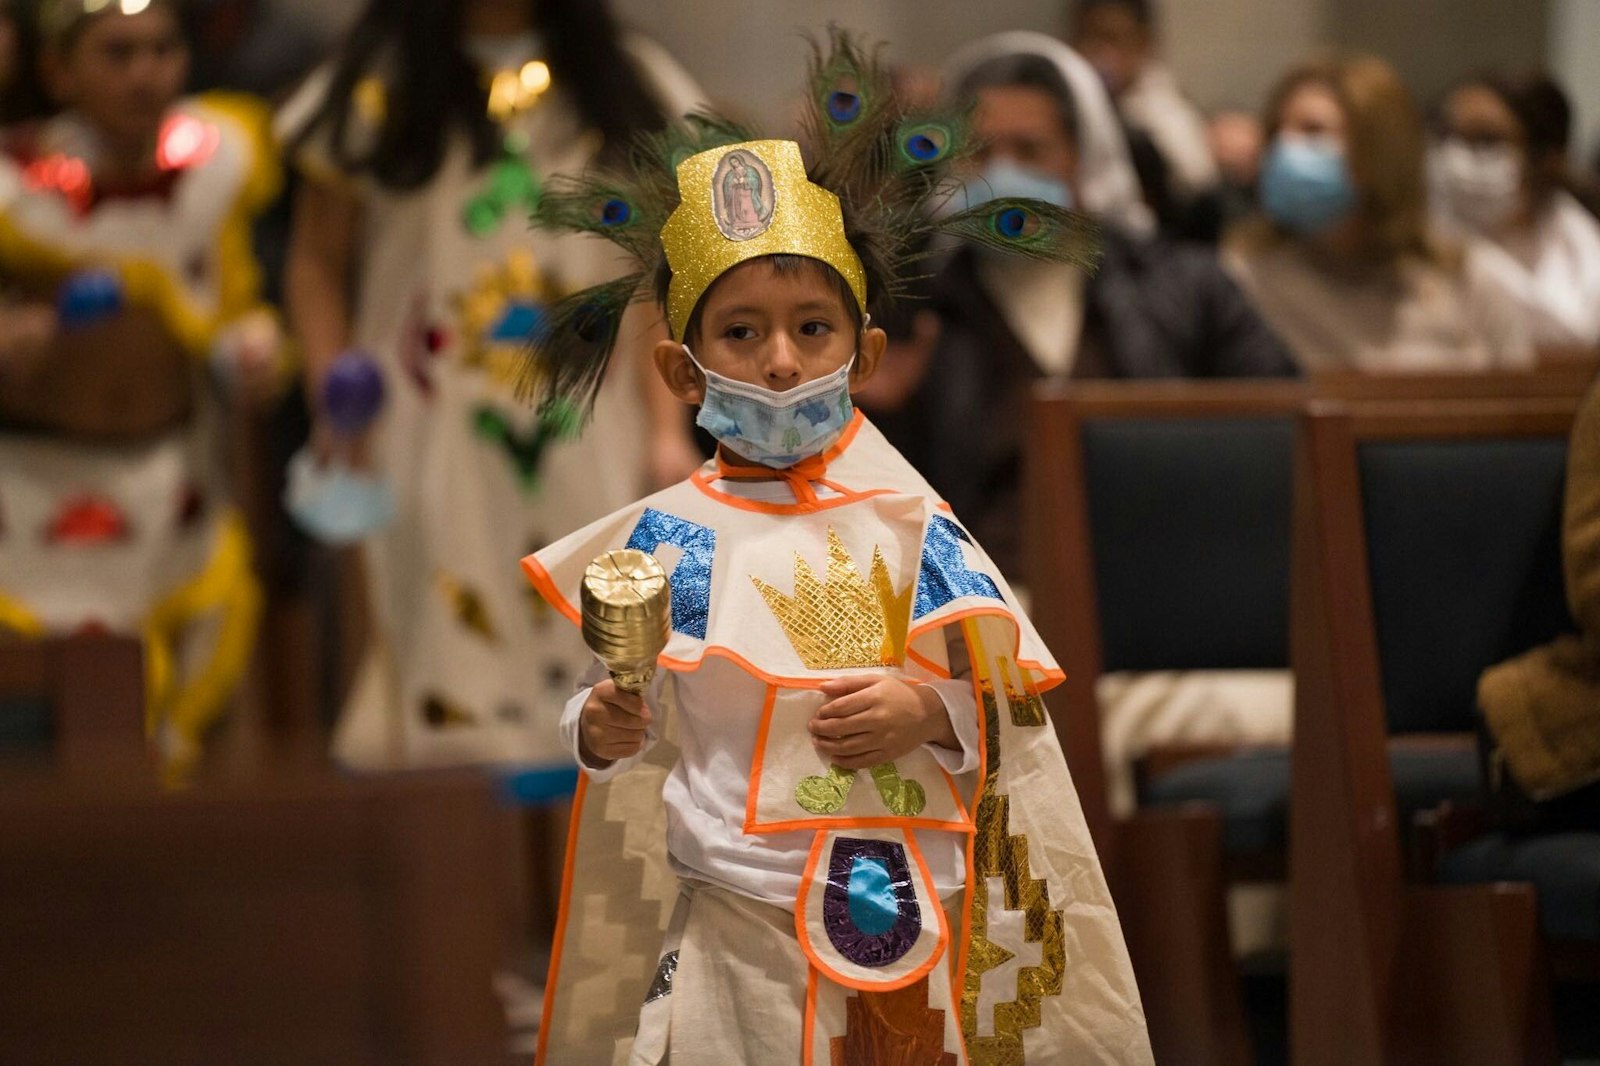 A child dresses in traditional Aztec garb during a pre-Mass performance. The feast of Our Lady of Guadalupe celebrates the Blessed Virgin Mary's appearance to St. Juan Diego in 1531, which resulted in the conversion of Mexico.